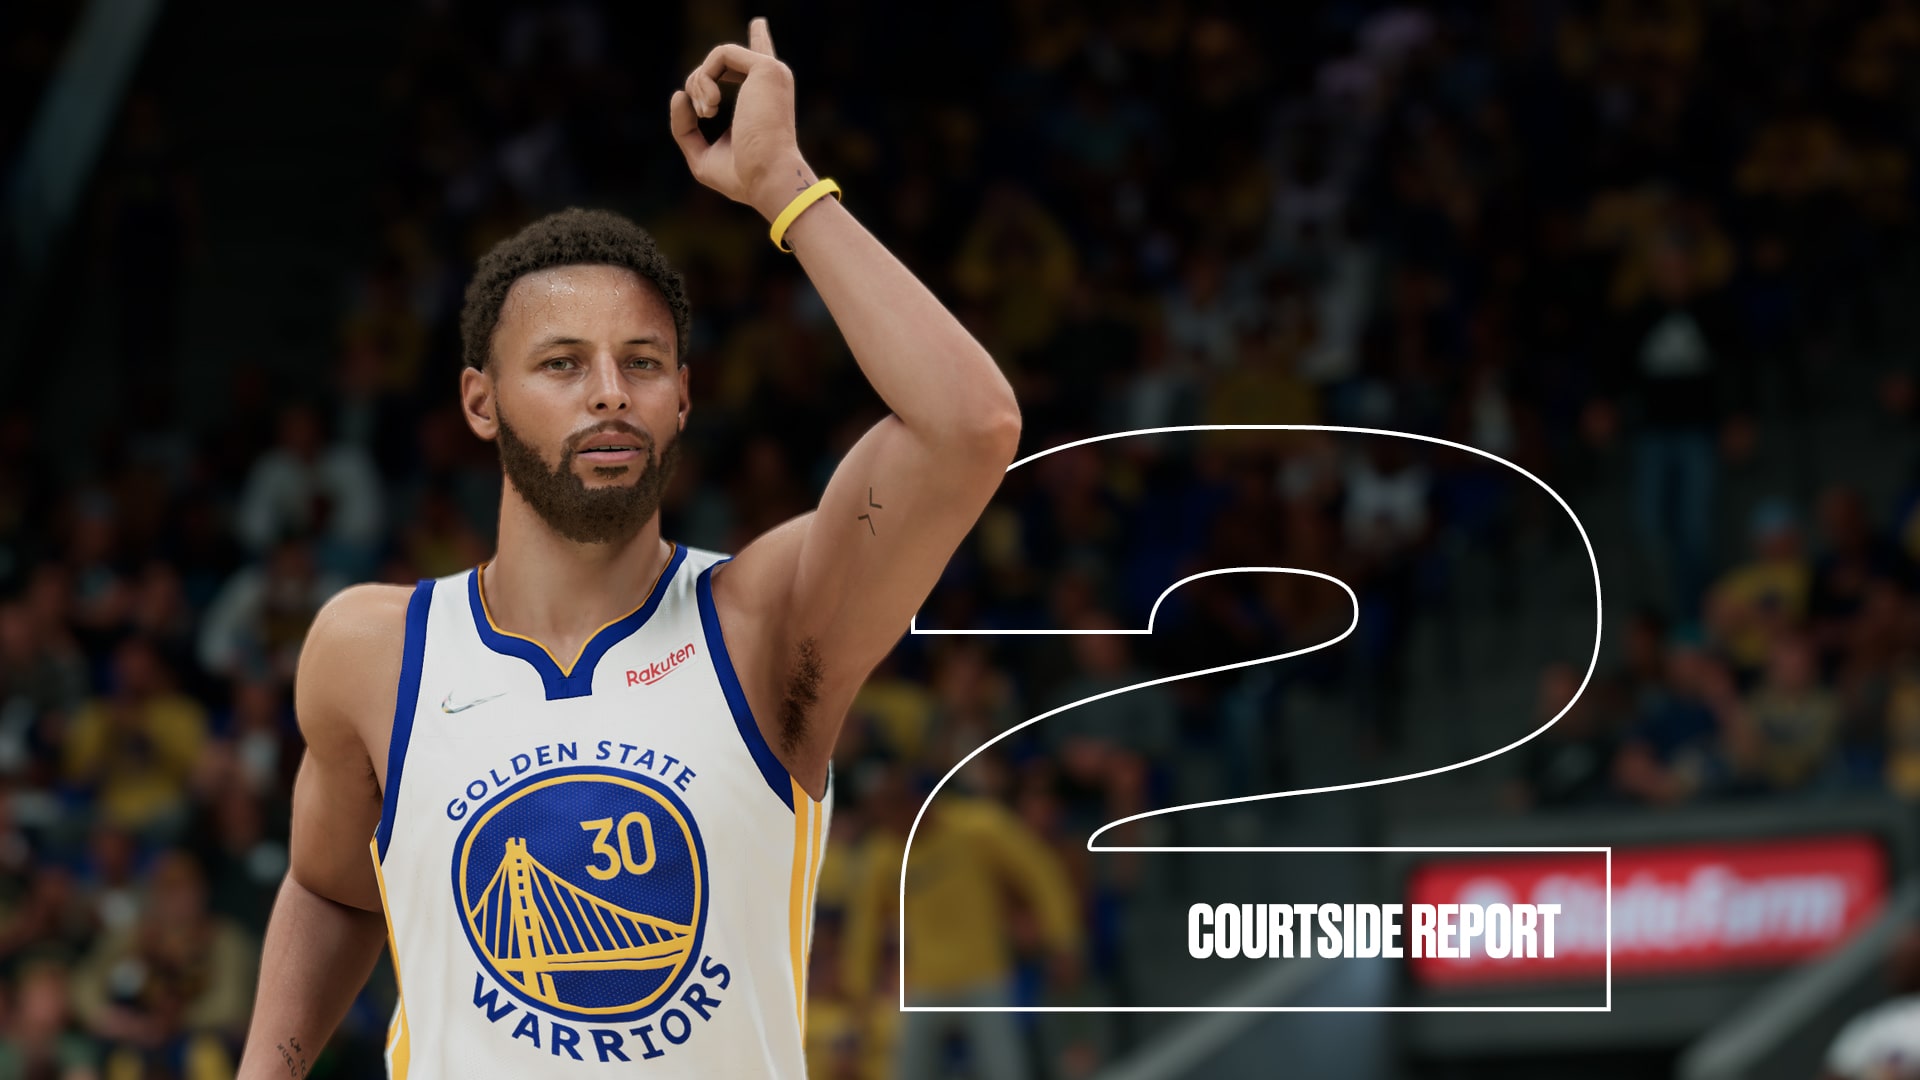 NBA 2K23 Highest Rated Players Revealed (Overall, Rookies and More)